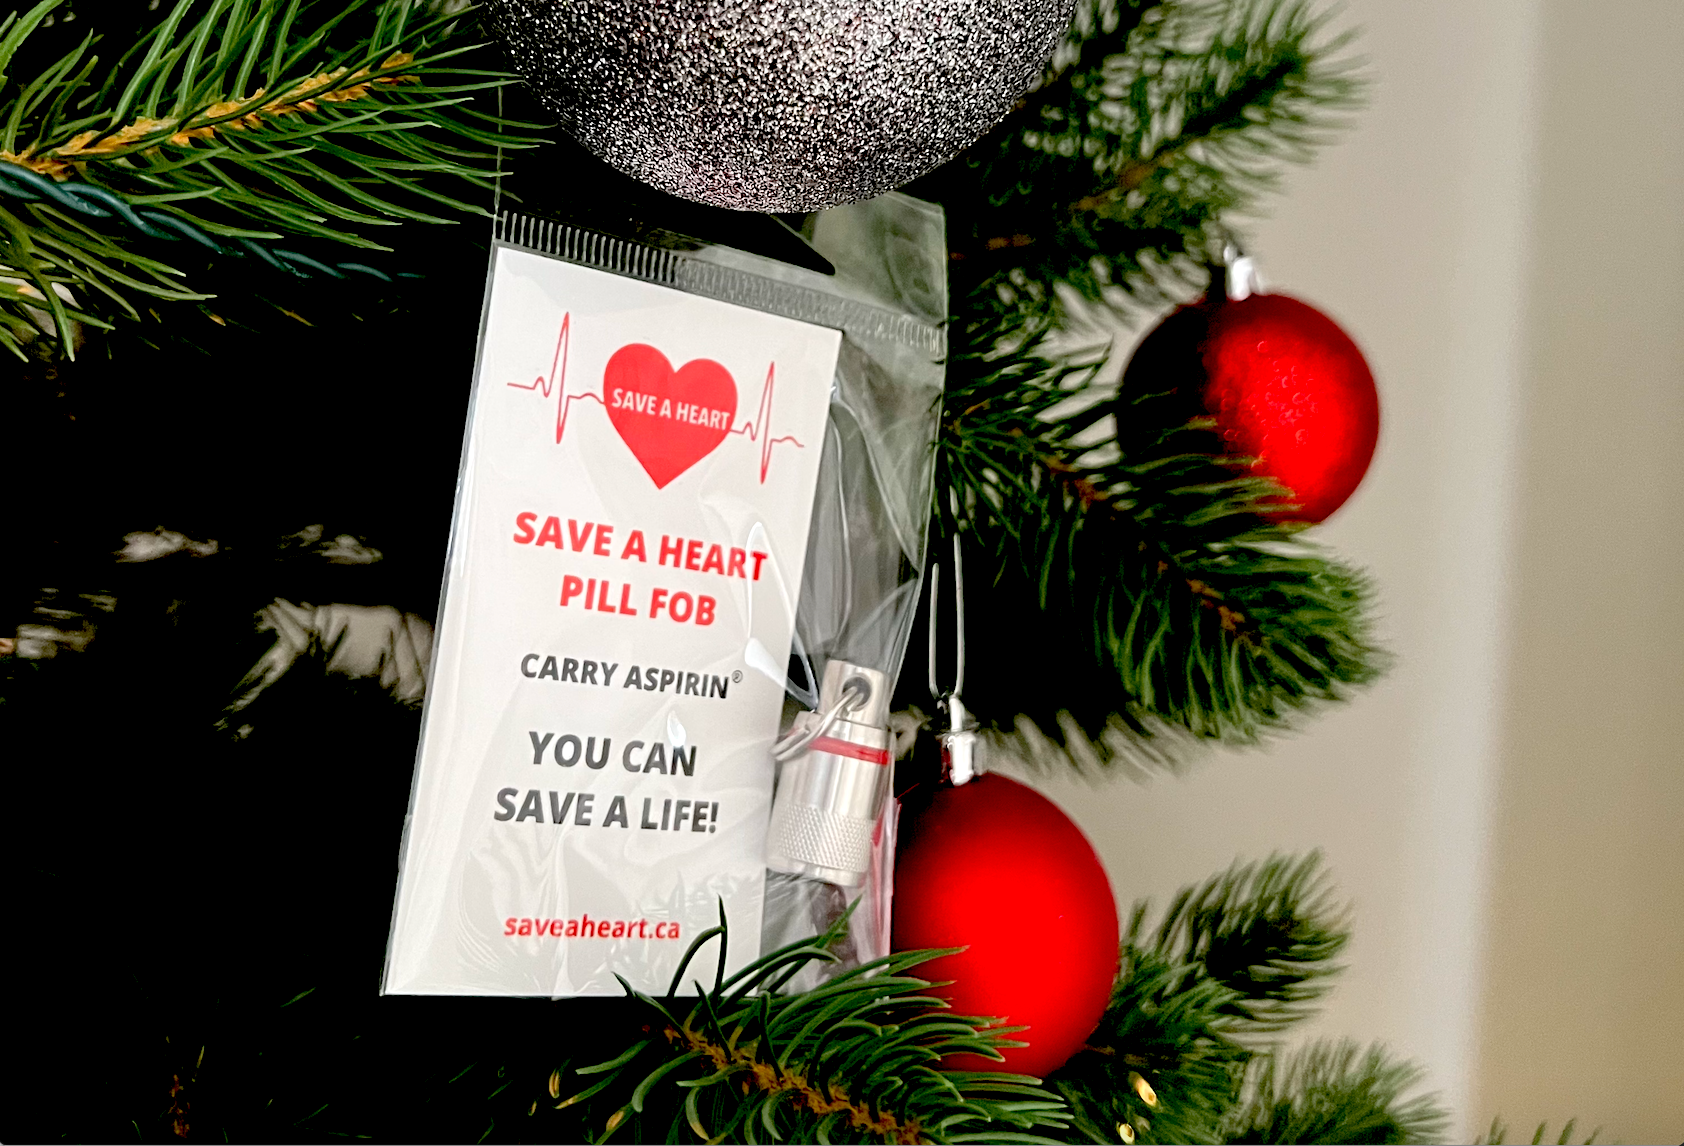 Why the Save a Heart Pill Fob is the Perfect Holiday Present